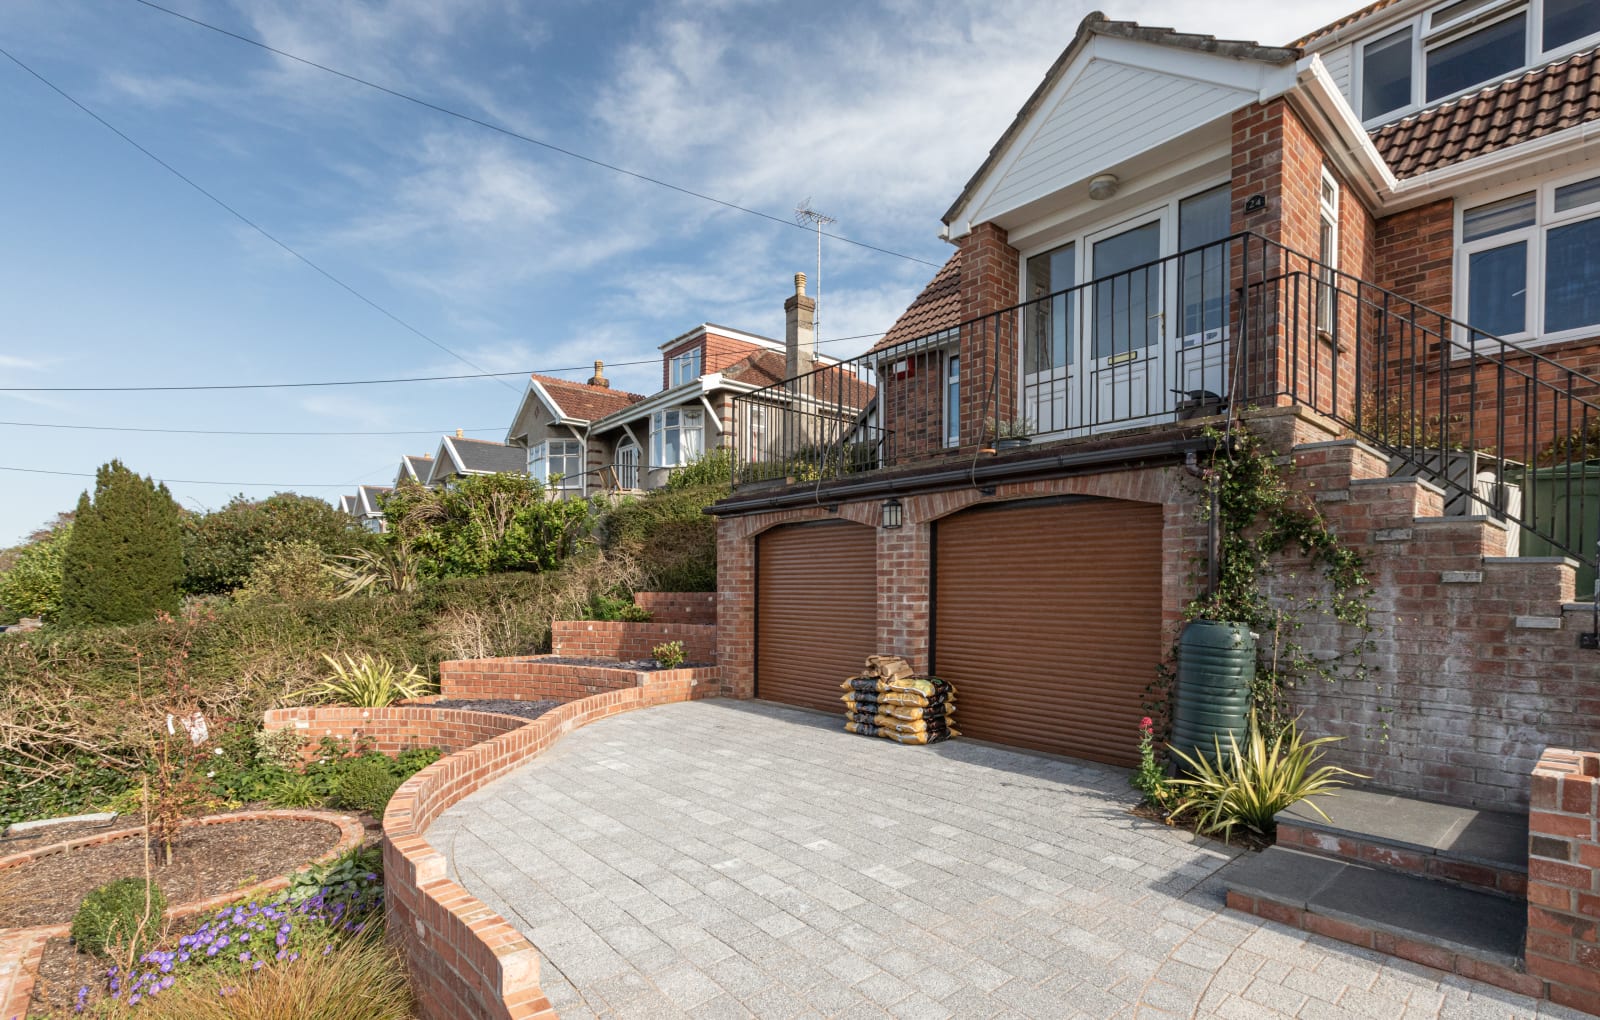 A curved driveway design with a multi-level front garden